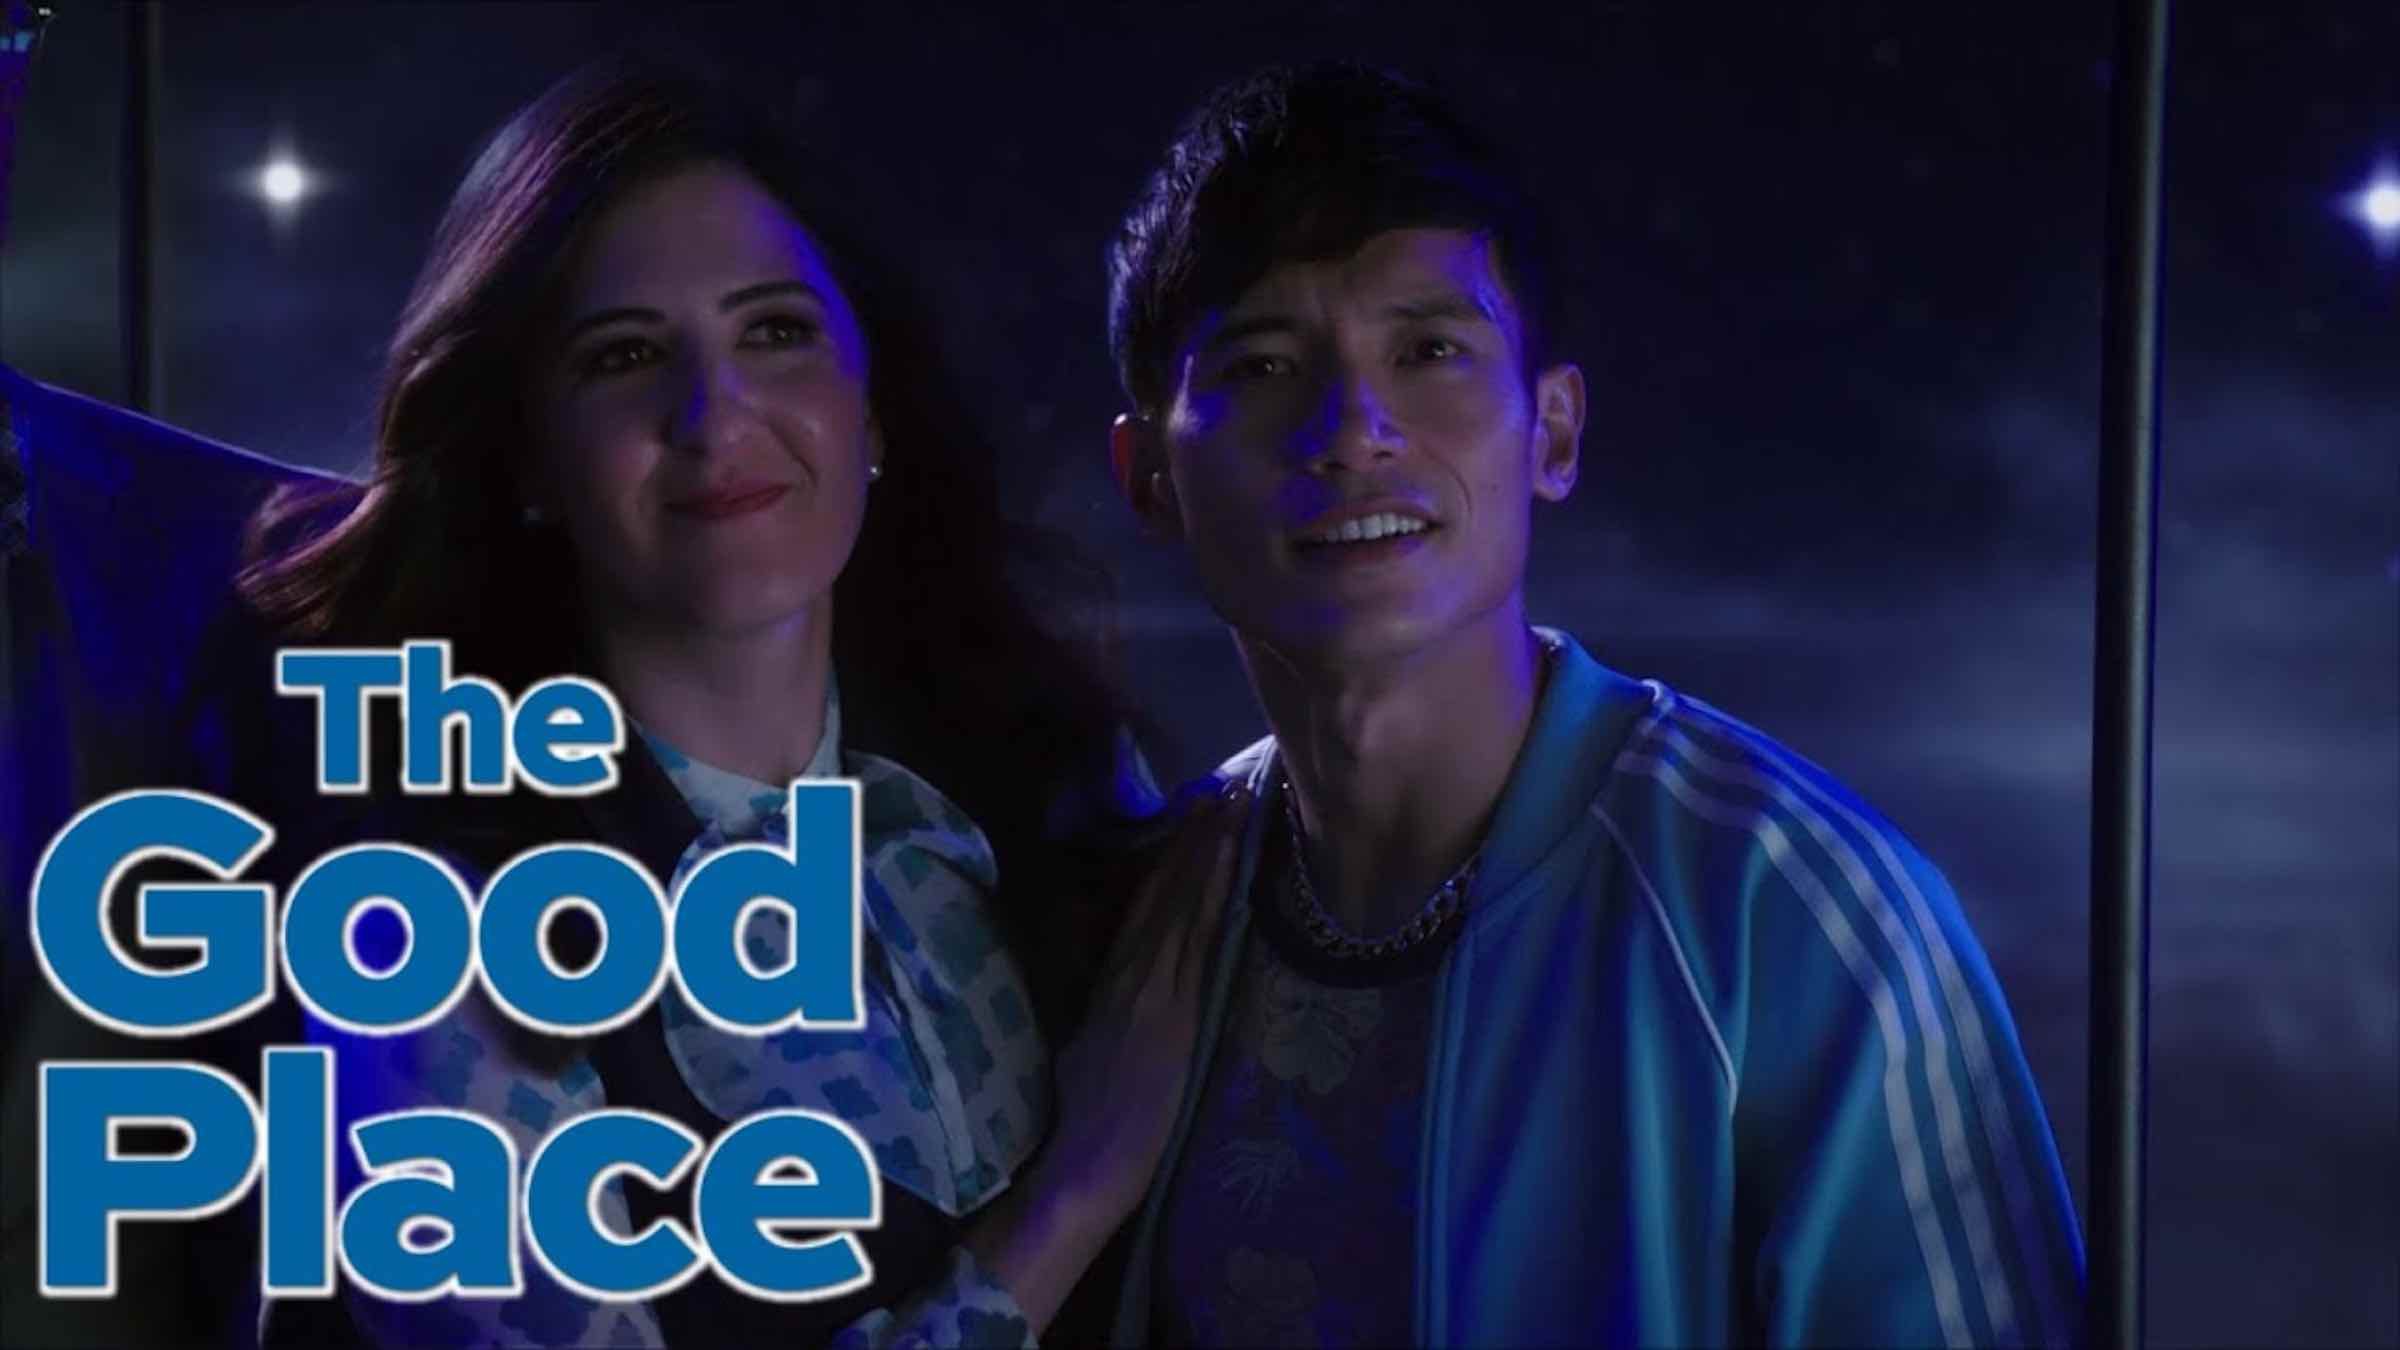 If we’ve learned anything from past finales of 'The Good Place' NBC, “Patty” ending on a high note means we’re screwed. Here's our season 4 ep. 12 recap.